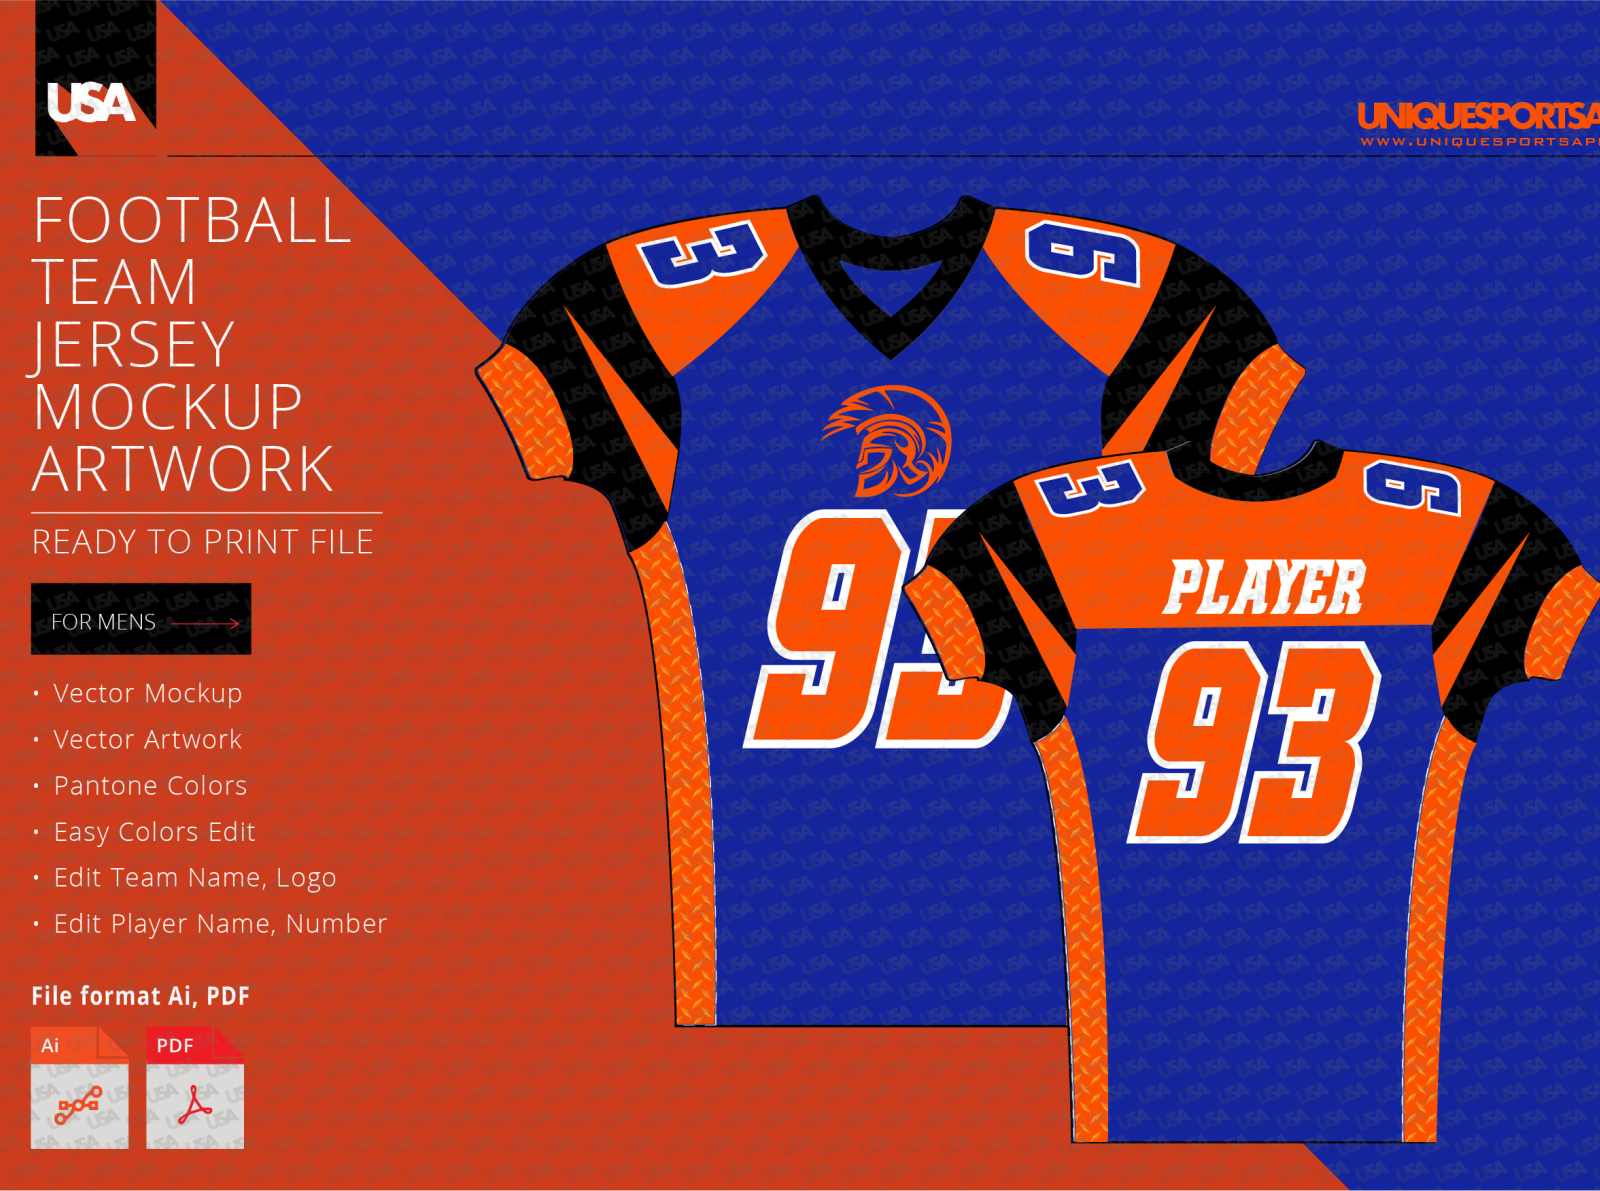 Download WARRIORS FOOTBALL COMPRESSION JERSEY DESIGN MOCKUP by ...